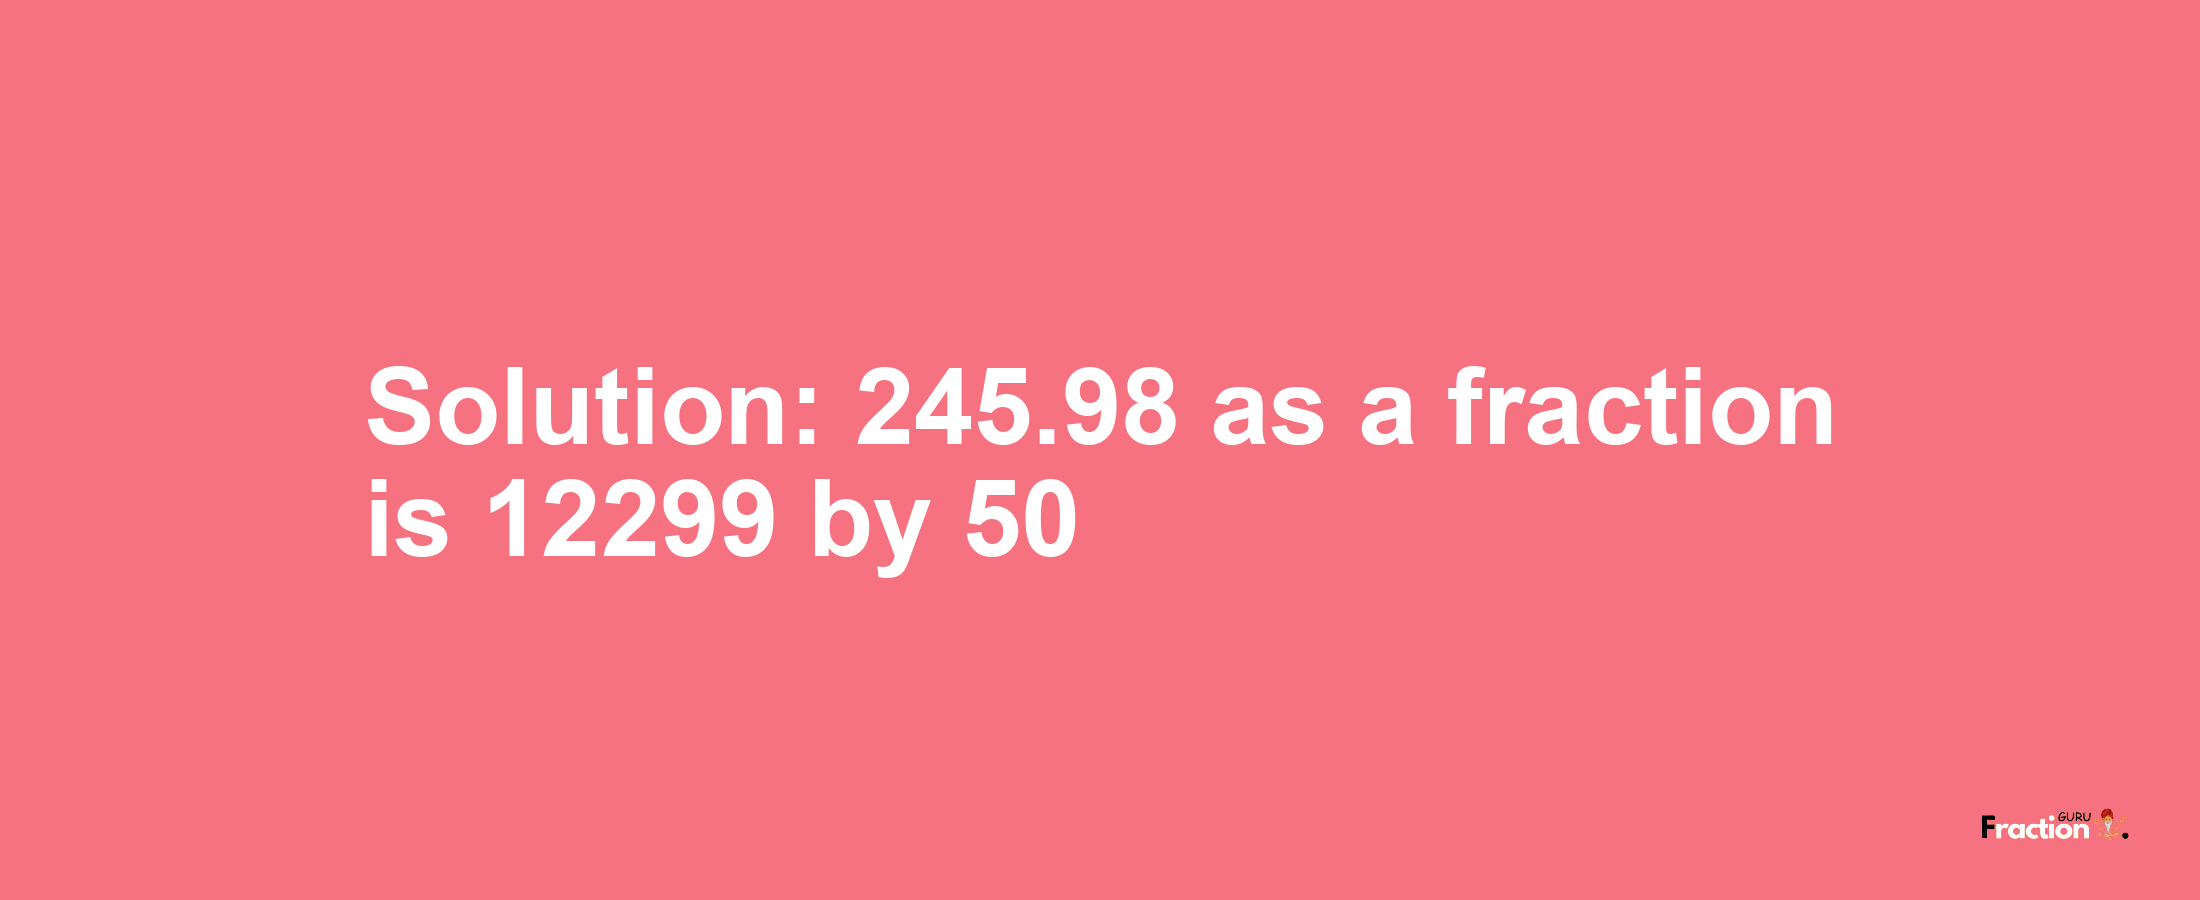 Solution:245.98 as a fraction is 12299/50